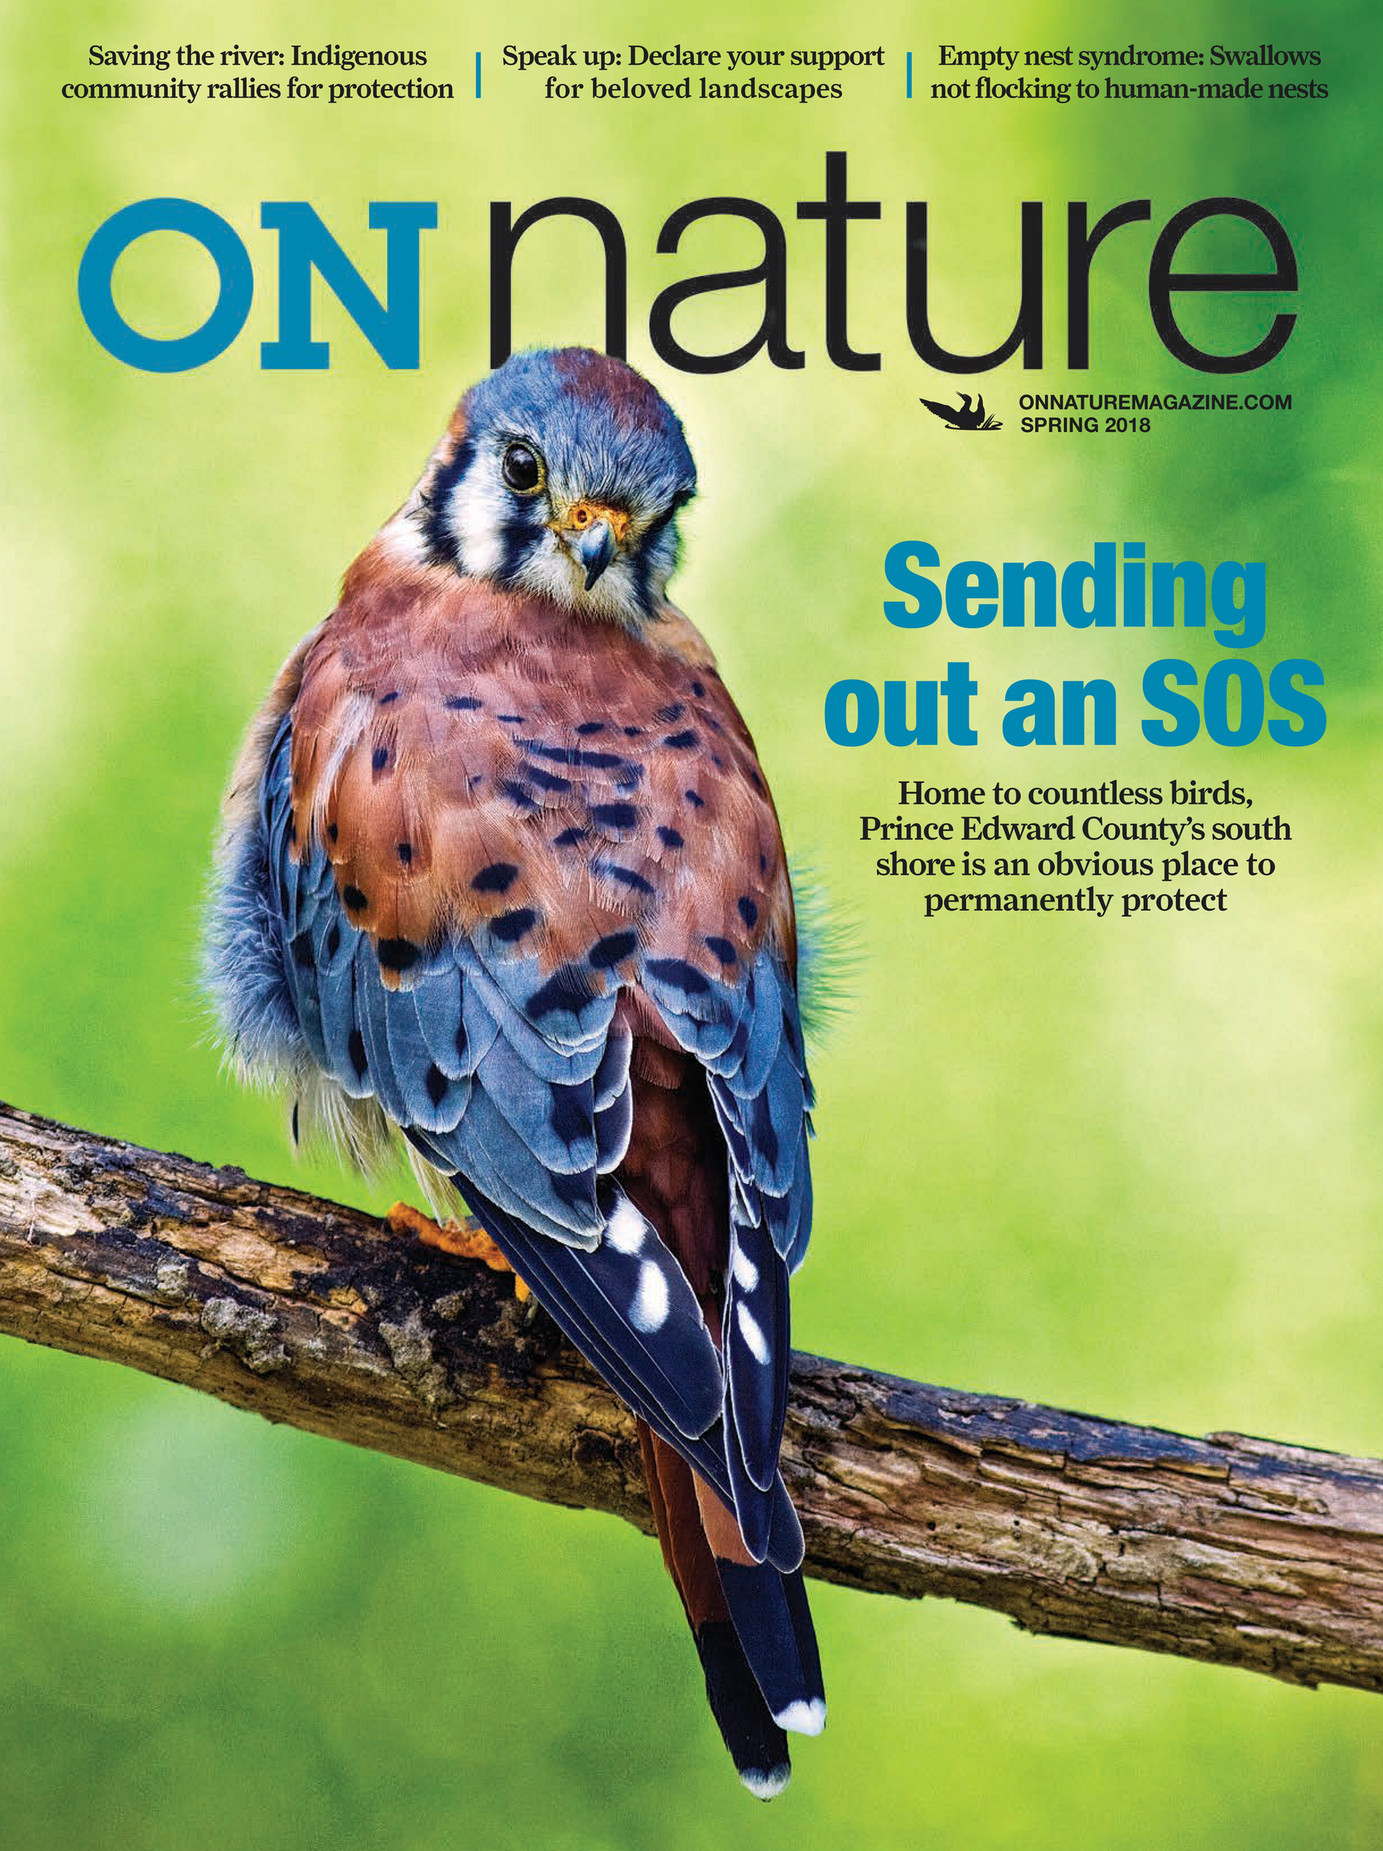 ON Nature magazine - Spring 2018 - Page 38-39